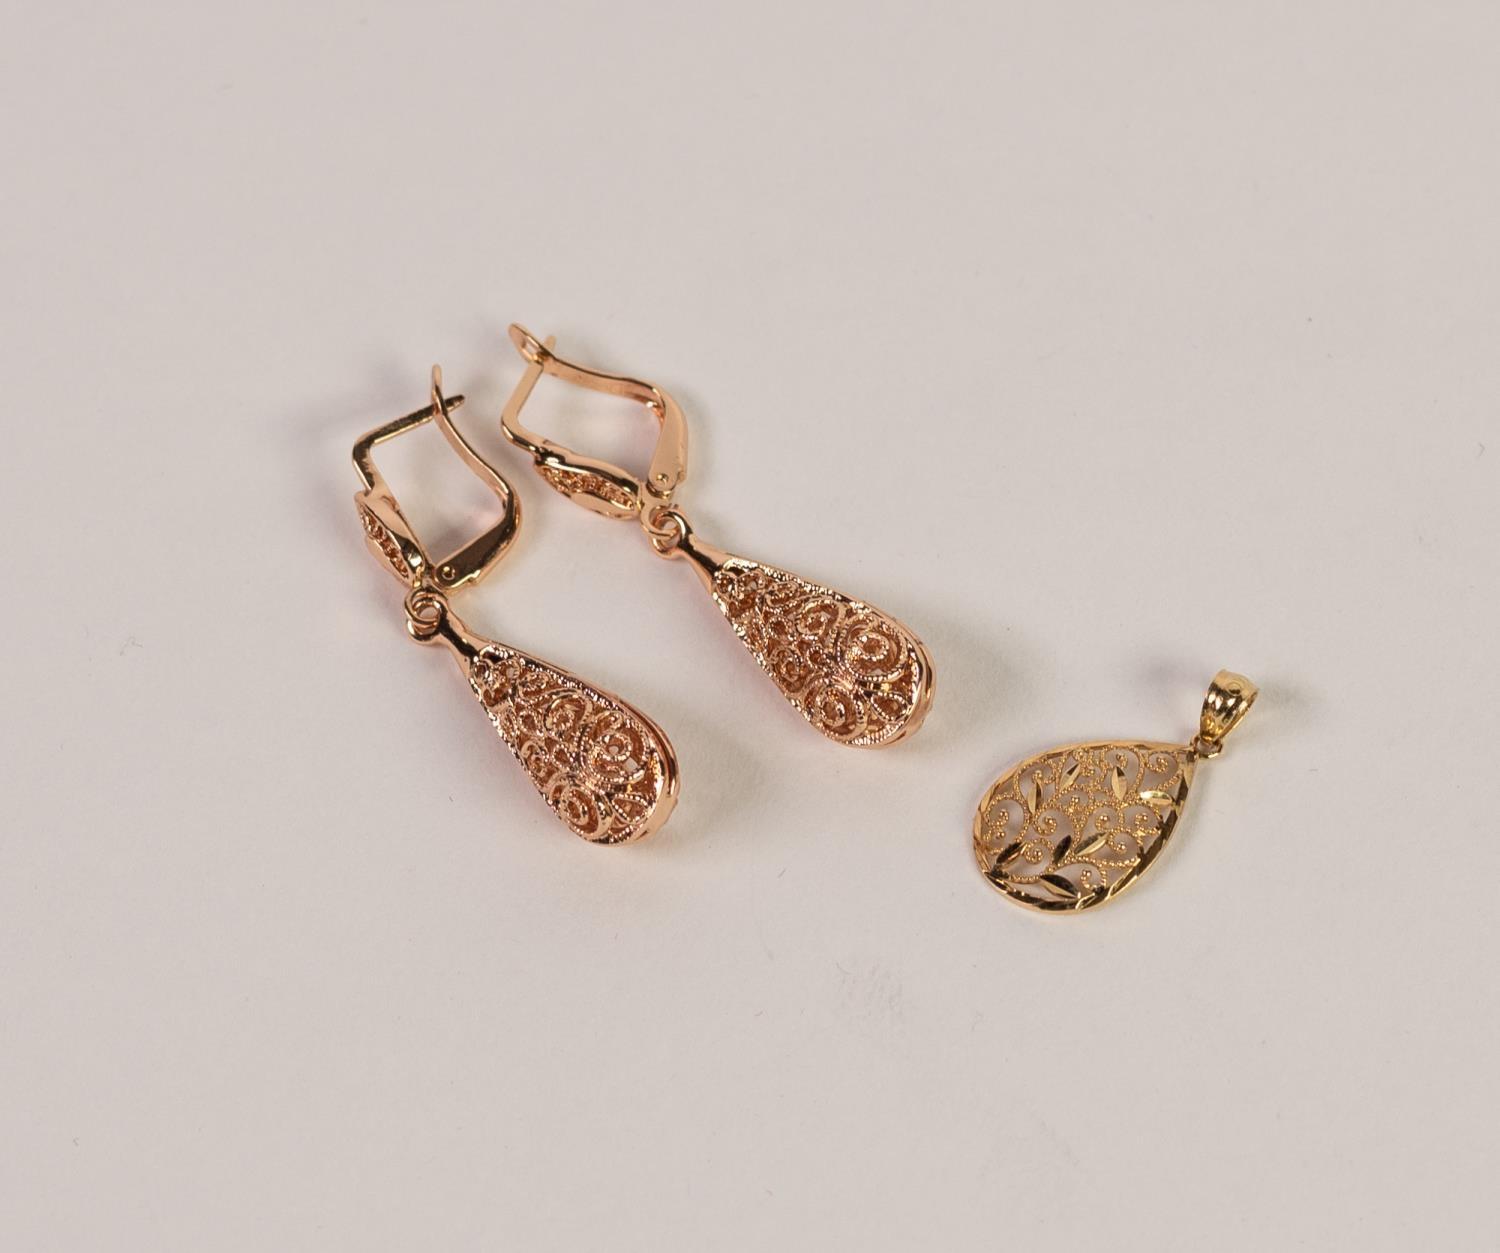 14K GOLD TEAR SHAPED OPEN WORK PENDANT of leaf and filigree pattern, 3/4in (1.75cm) high, 0.6 gm and